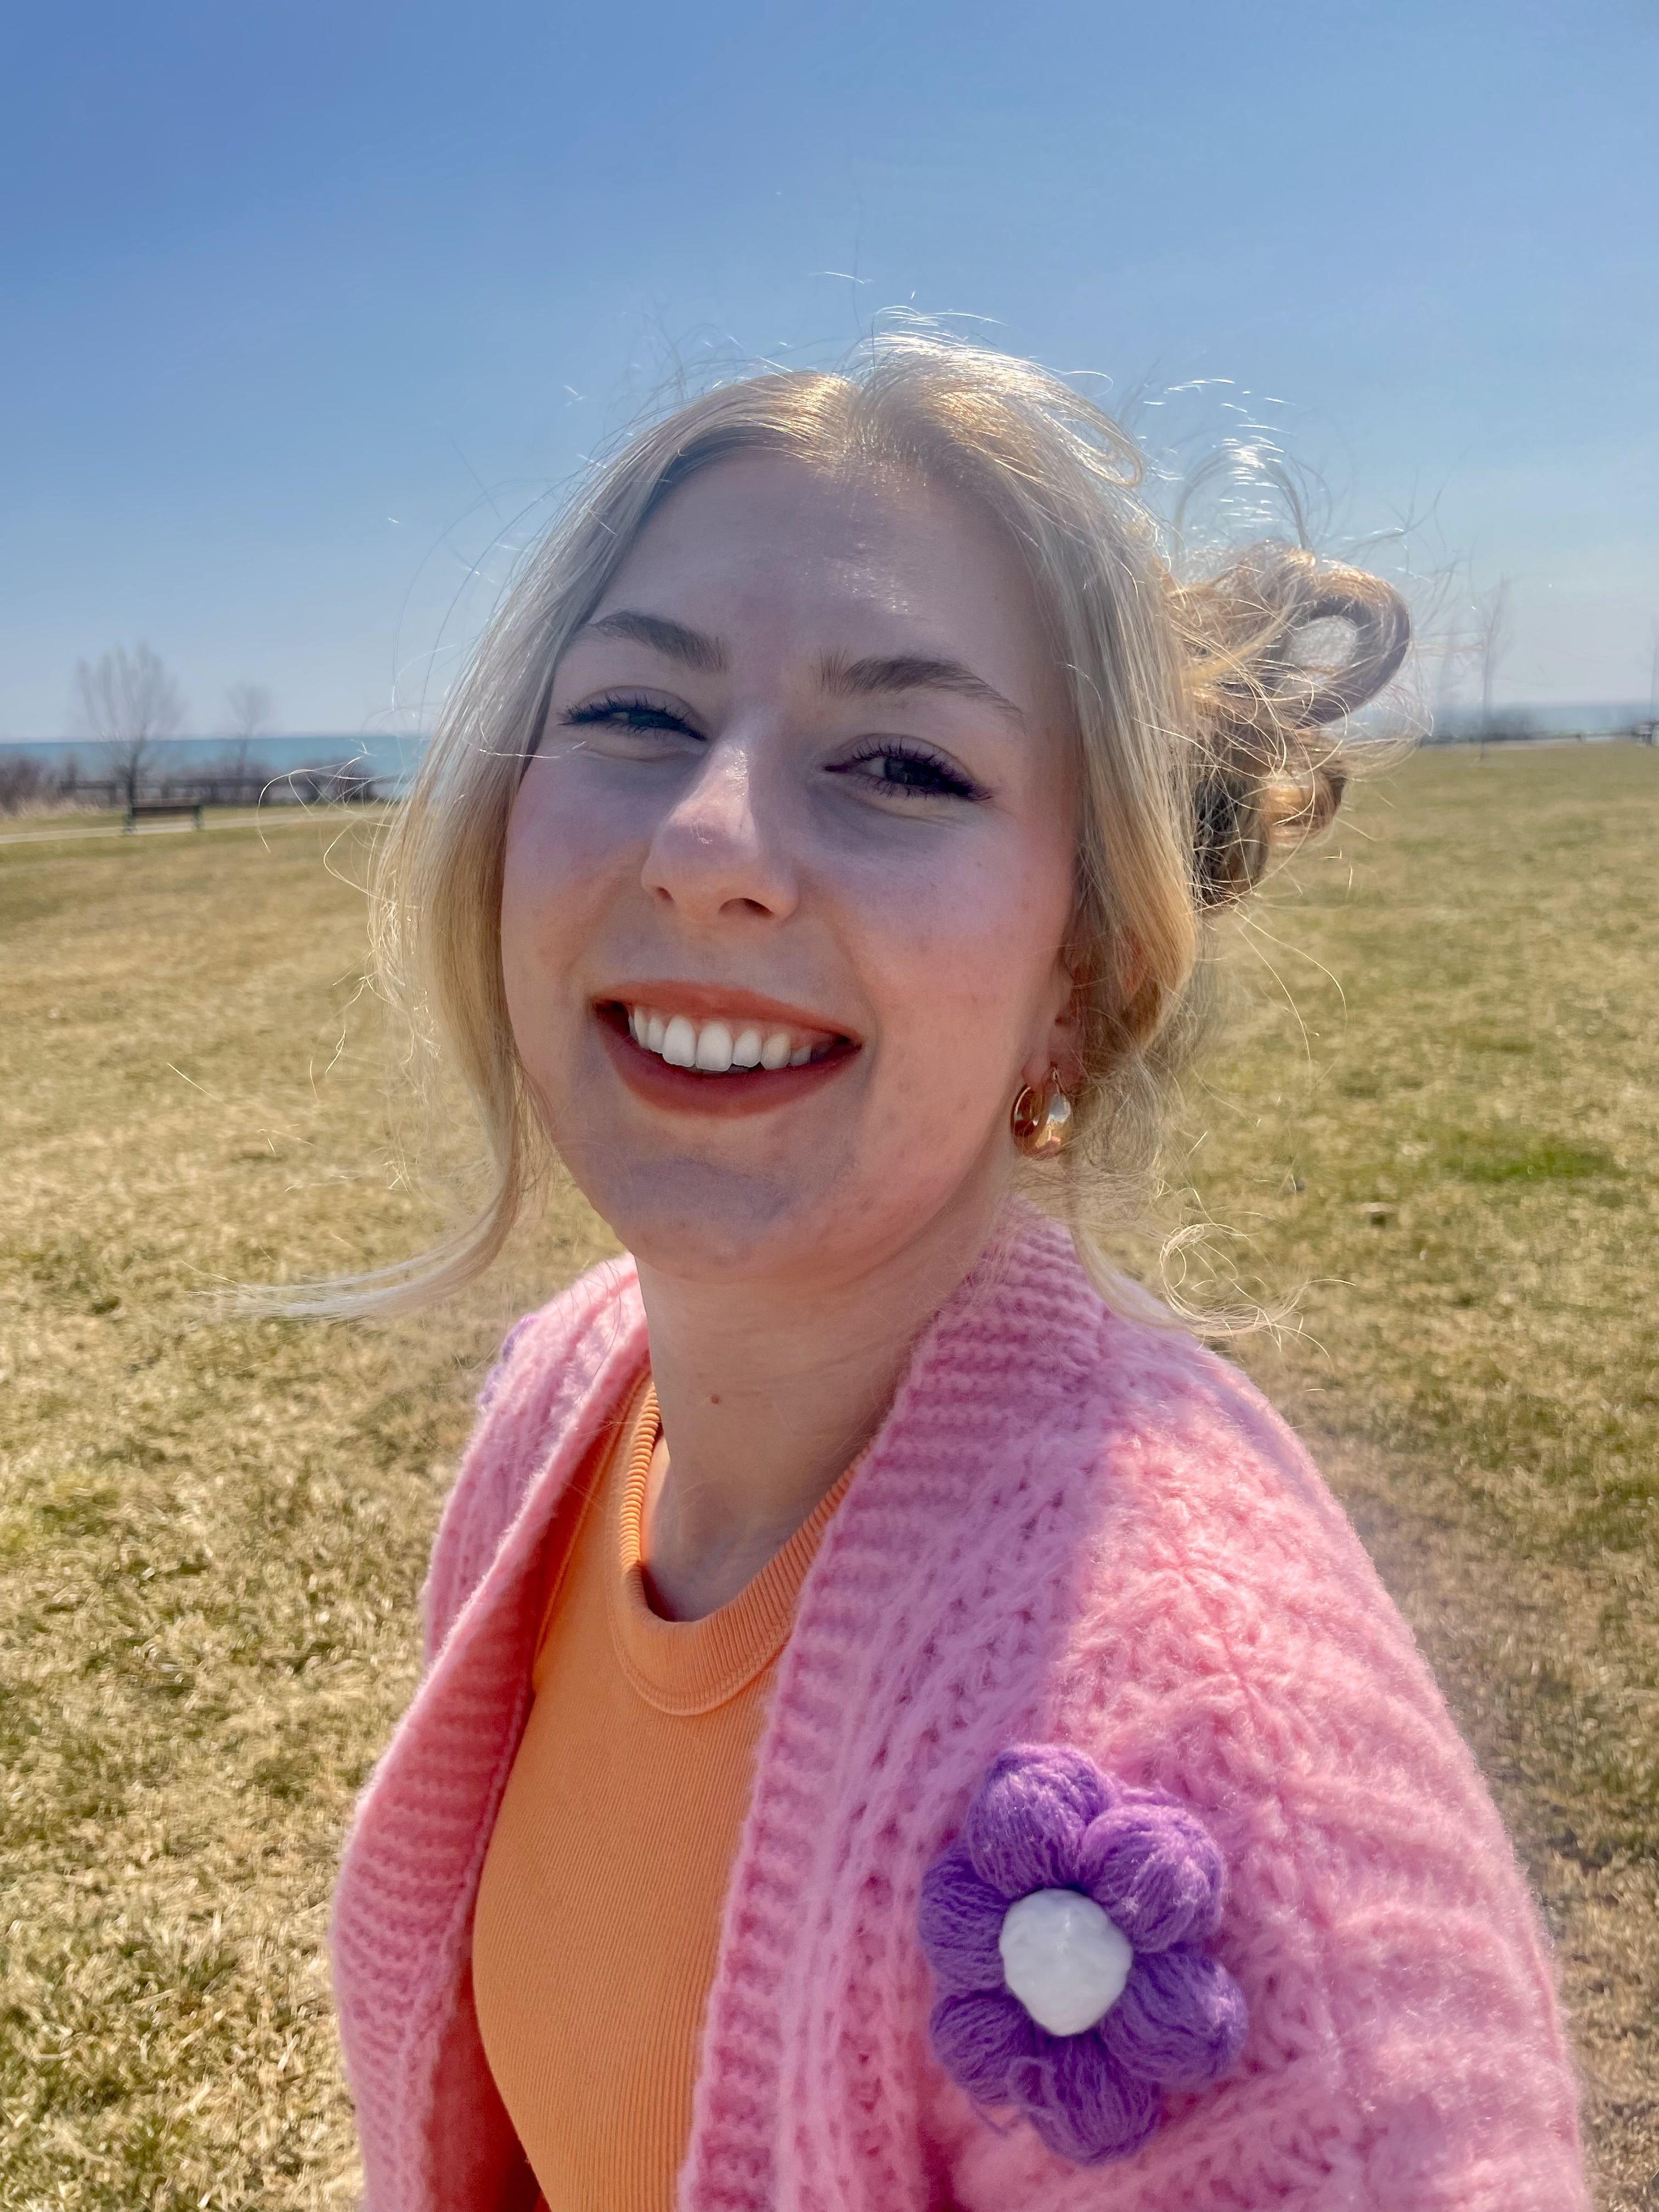 Twenty-something blonde woman smiling in a field. She's wearing an orange shirt and pink cardigan with crocheted flowers on it.